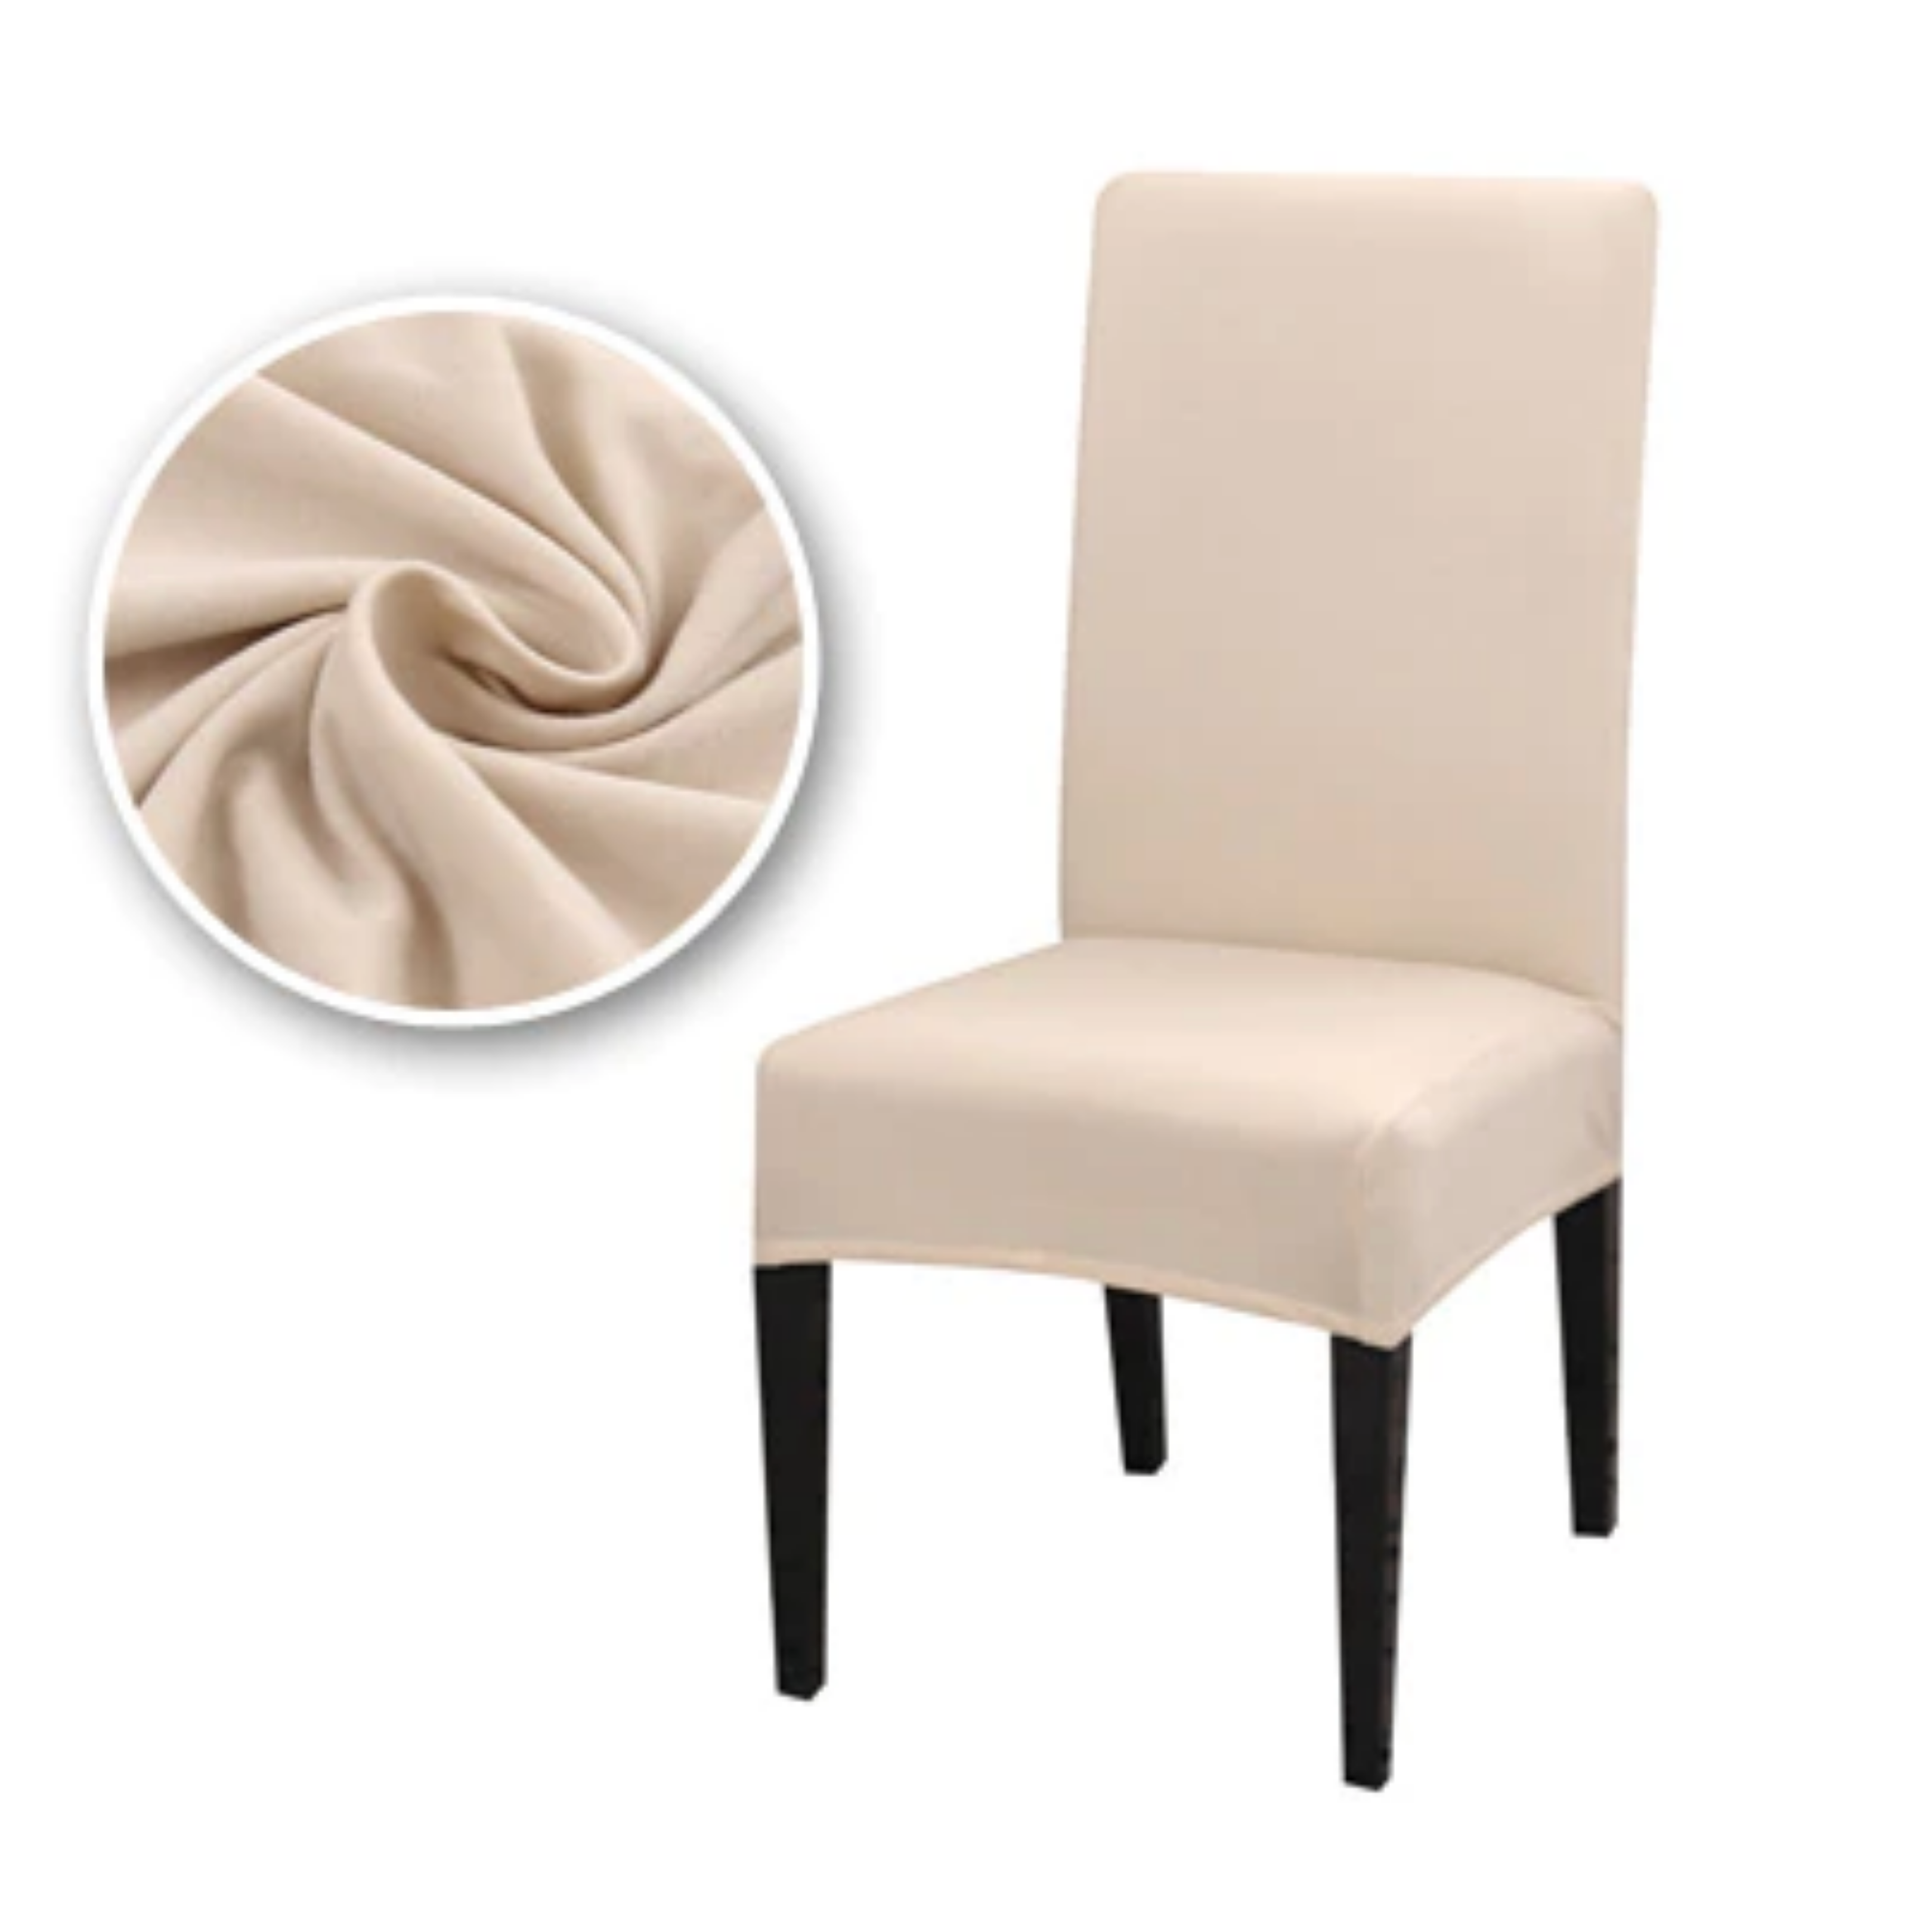 Irish Supply, SLIP COVERIE Removable Seat Chair Cover